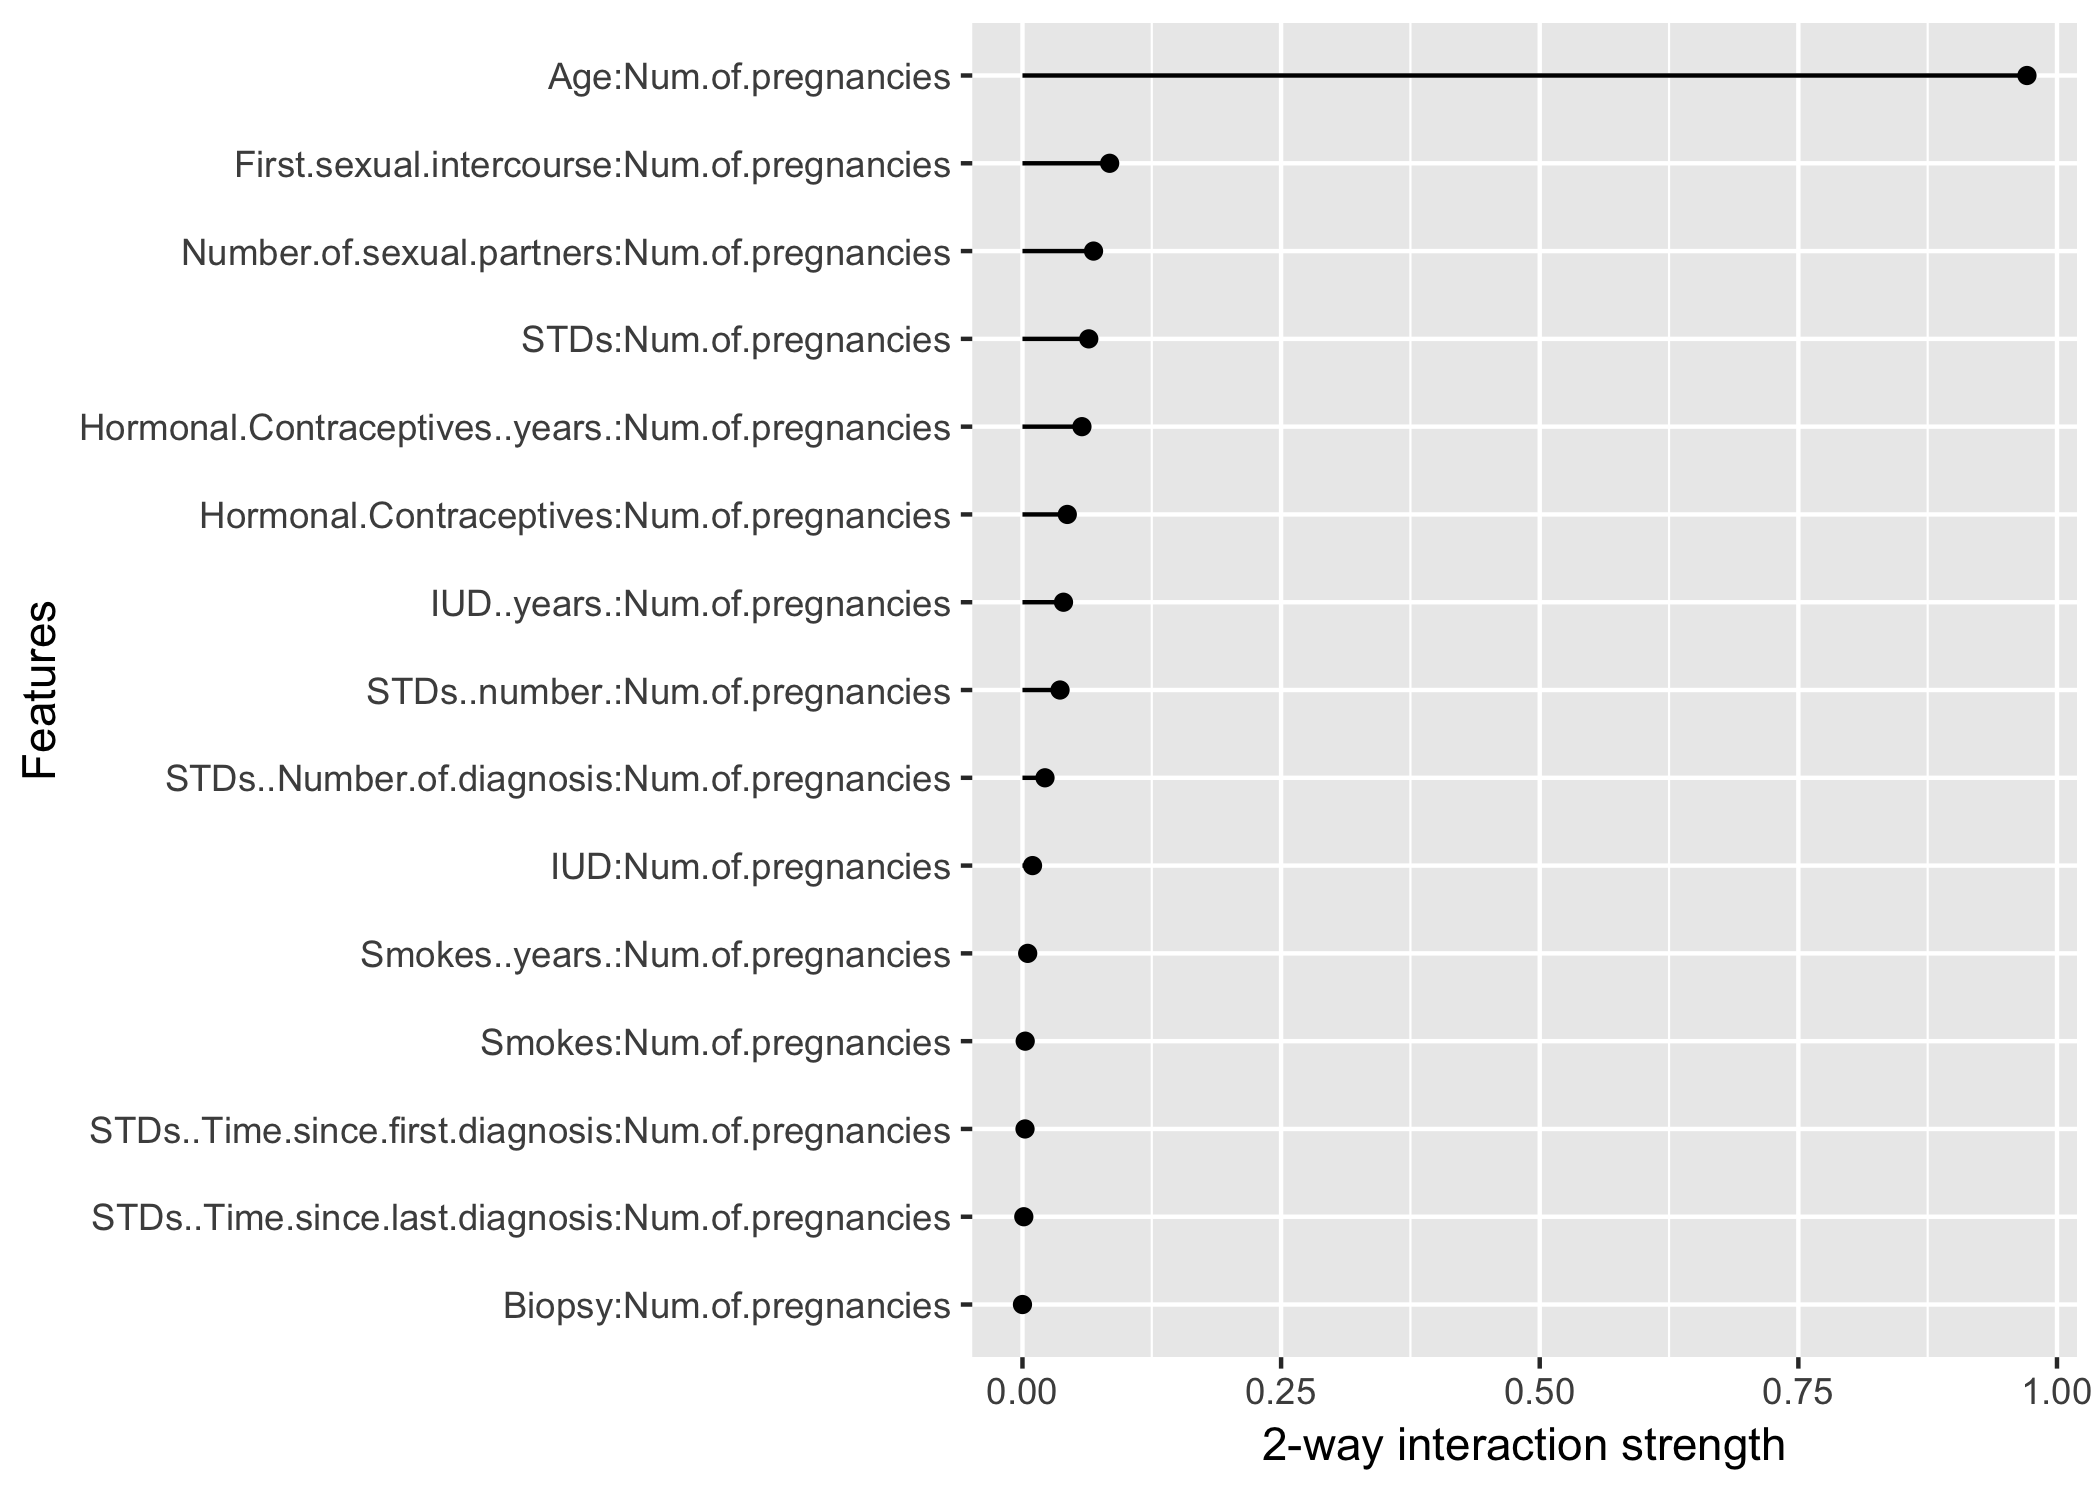 The 2-way interactions between number of pregnancies with each other feature. There is a strong interaction between the number of pregnancies and the age.